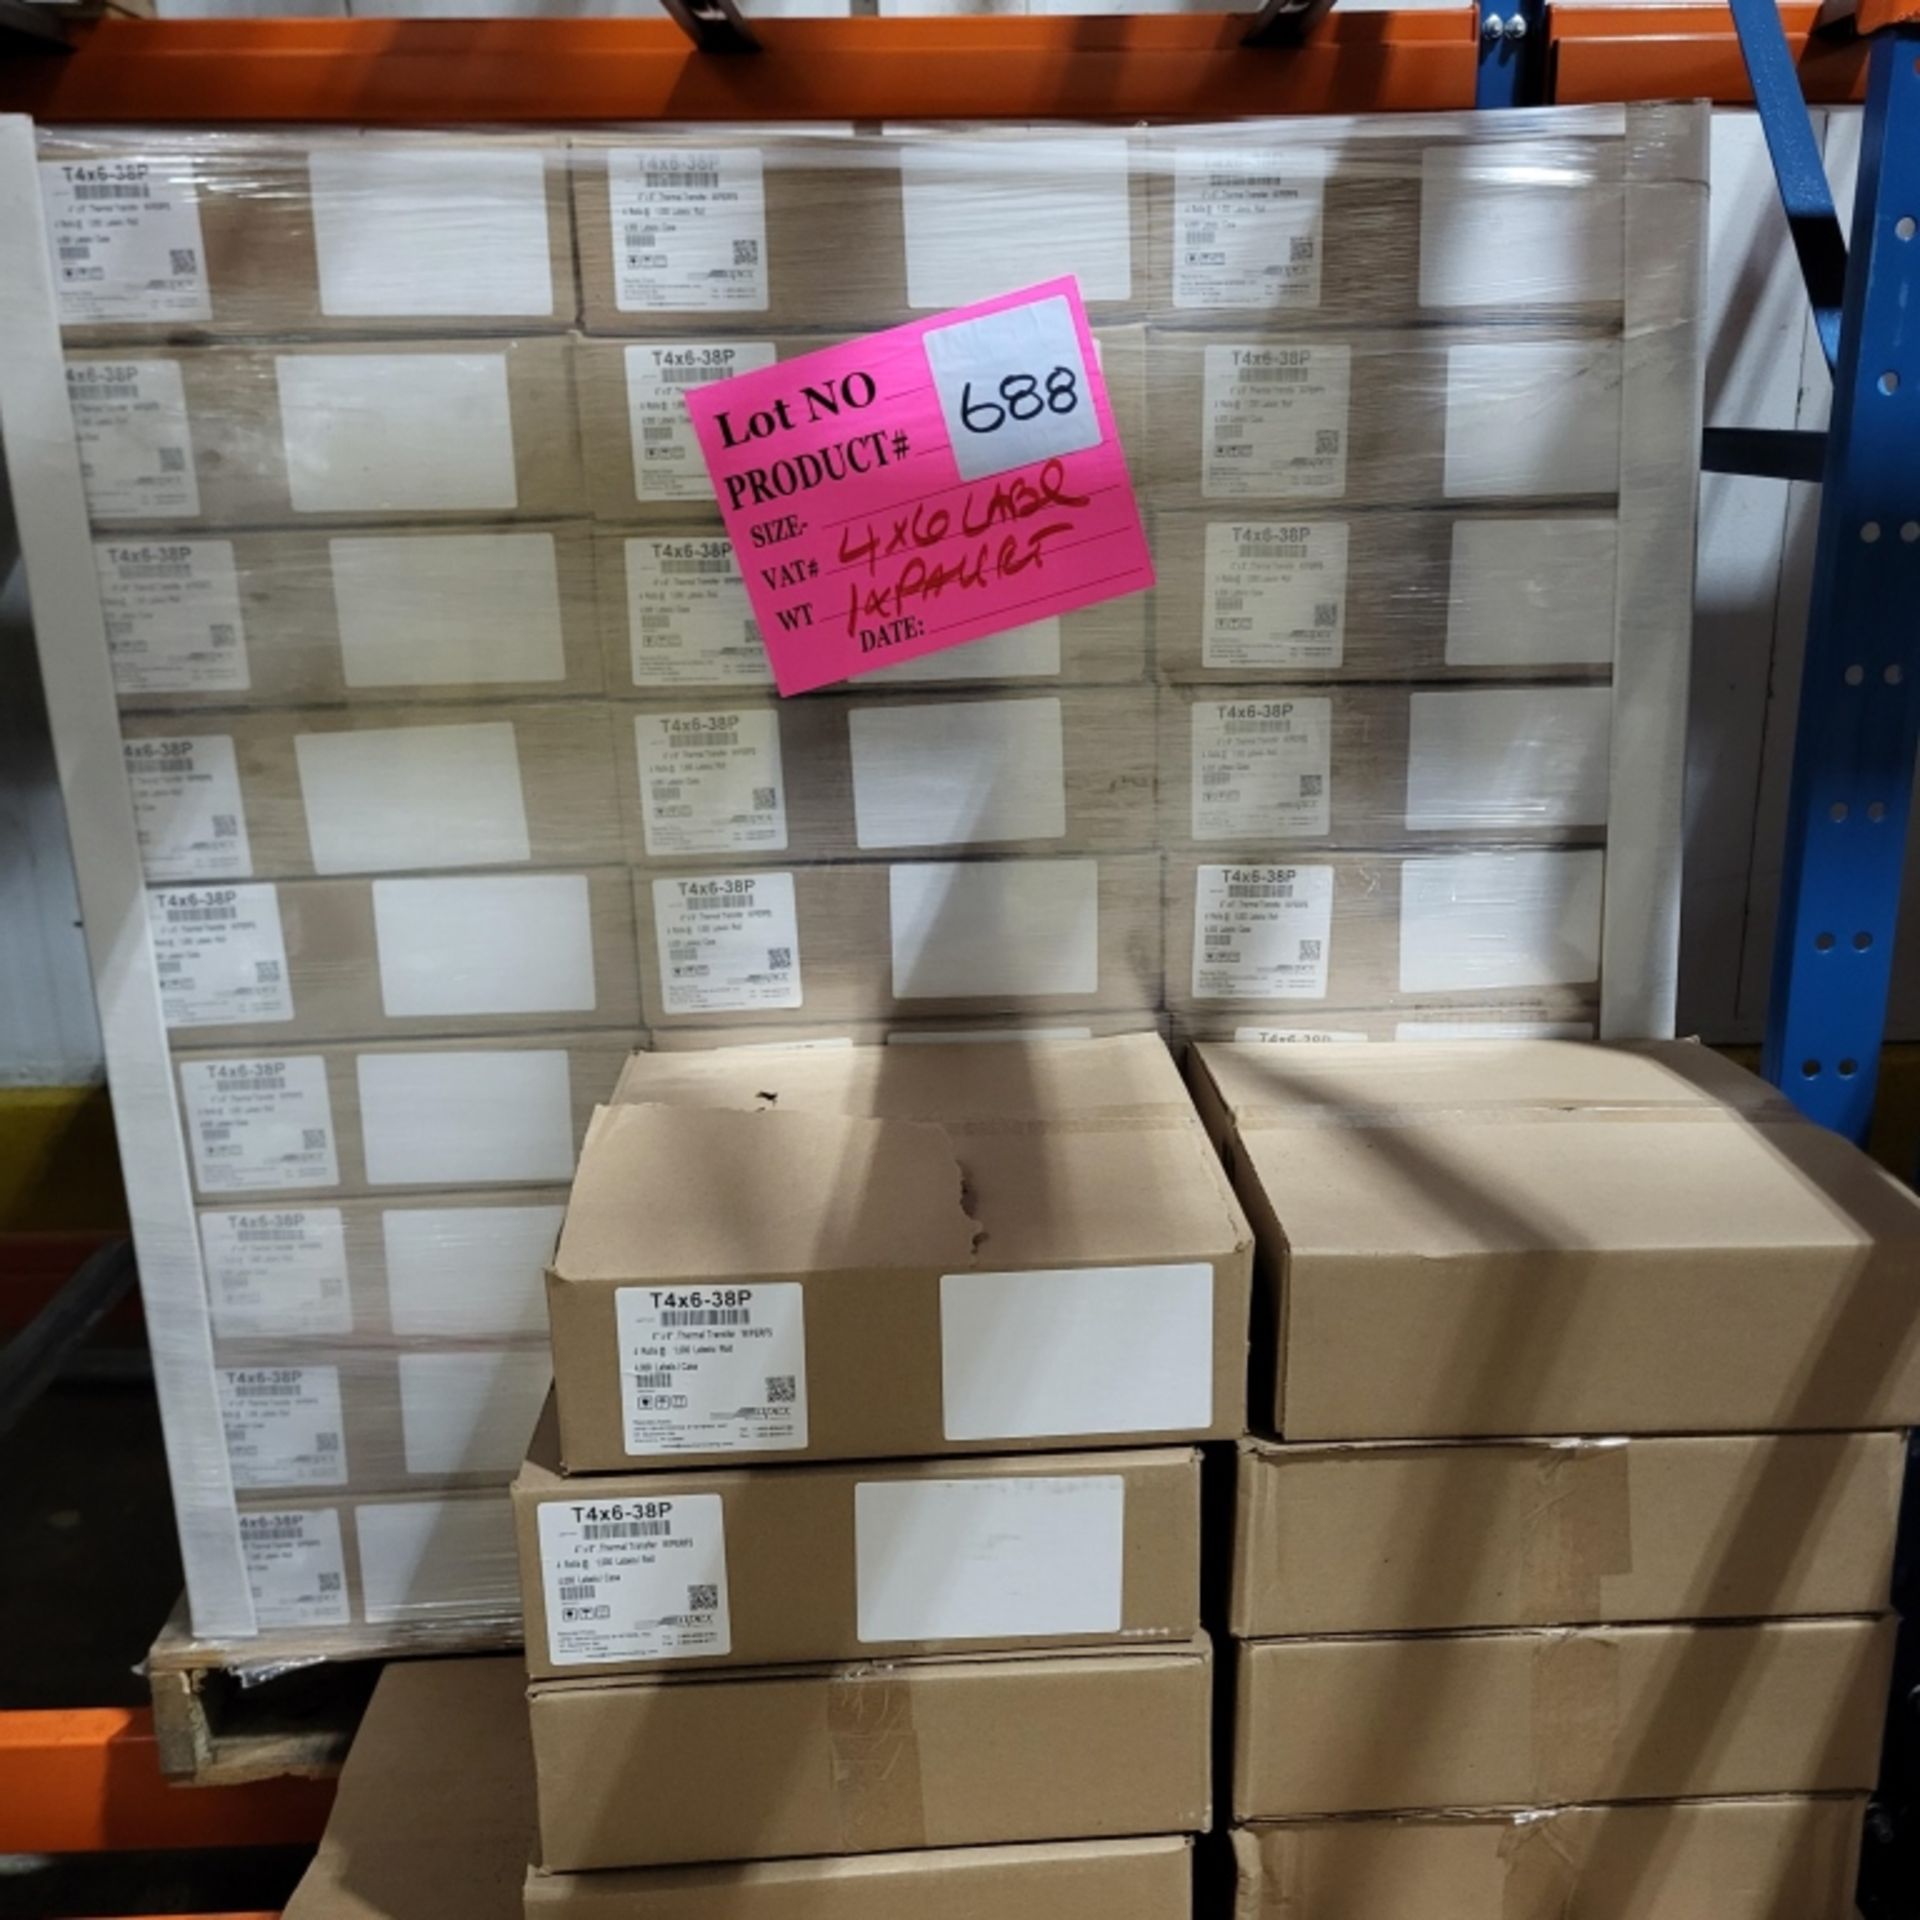 4 by 6 label - 1 pallet